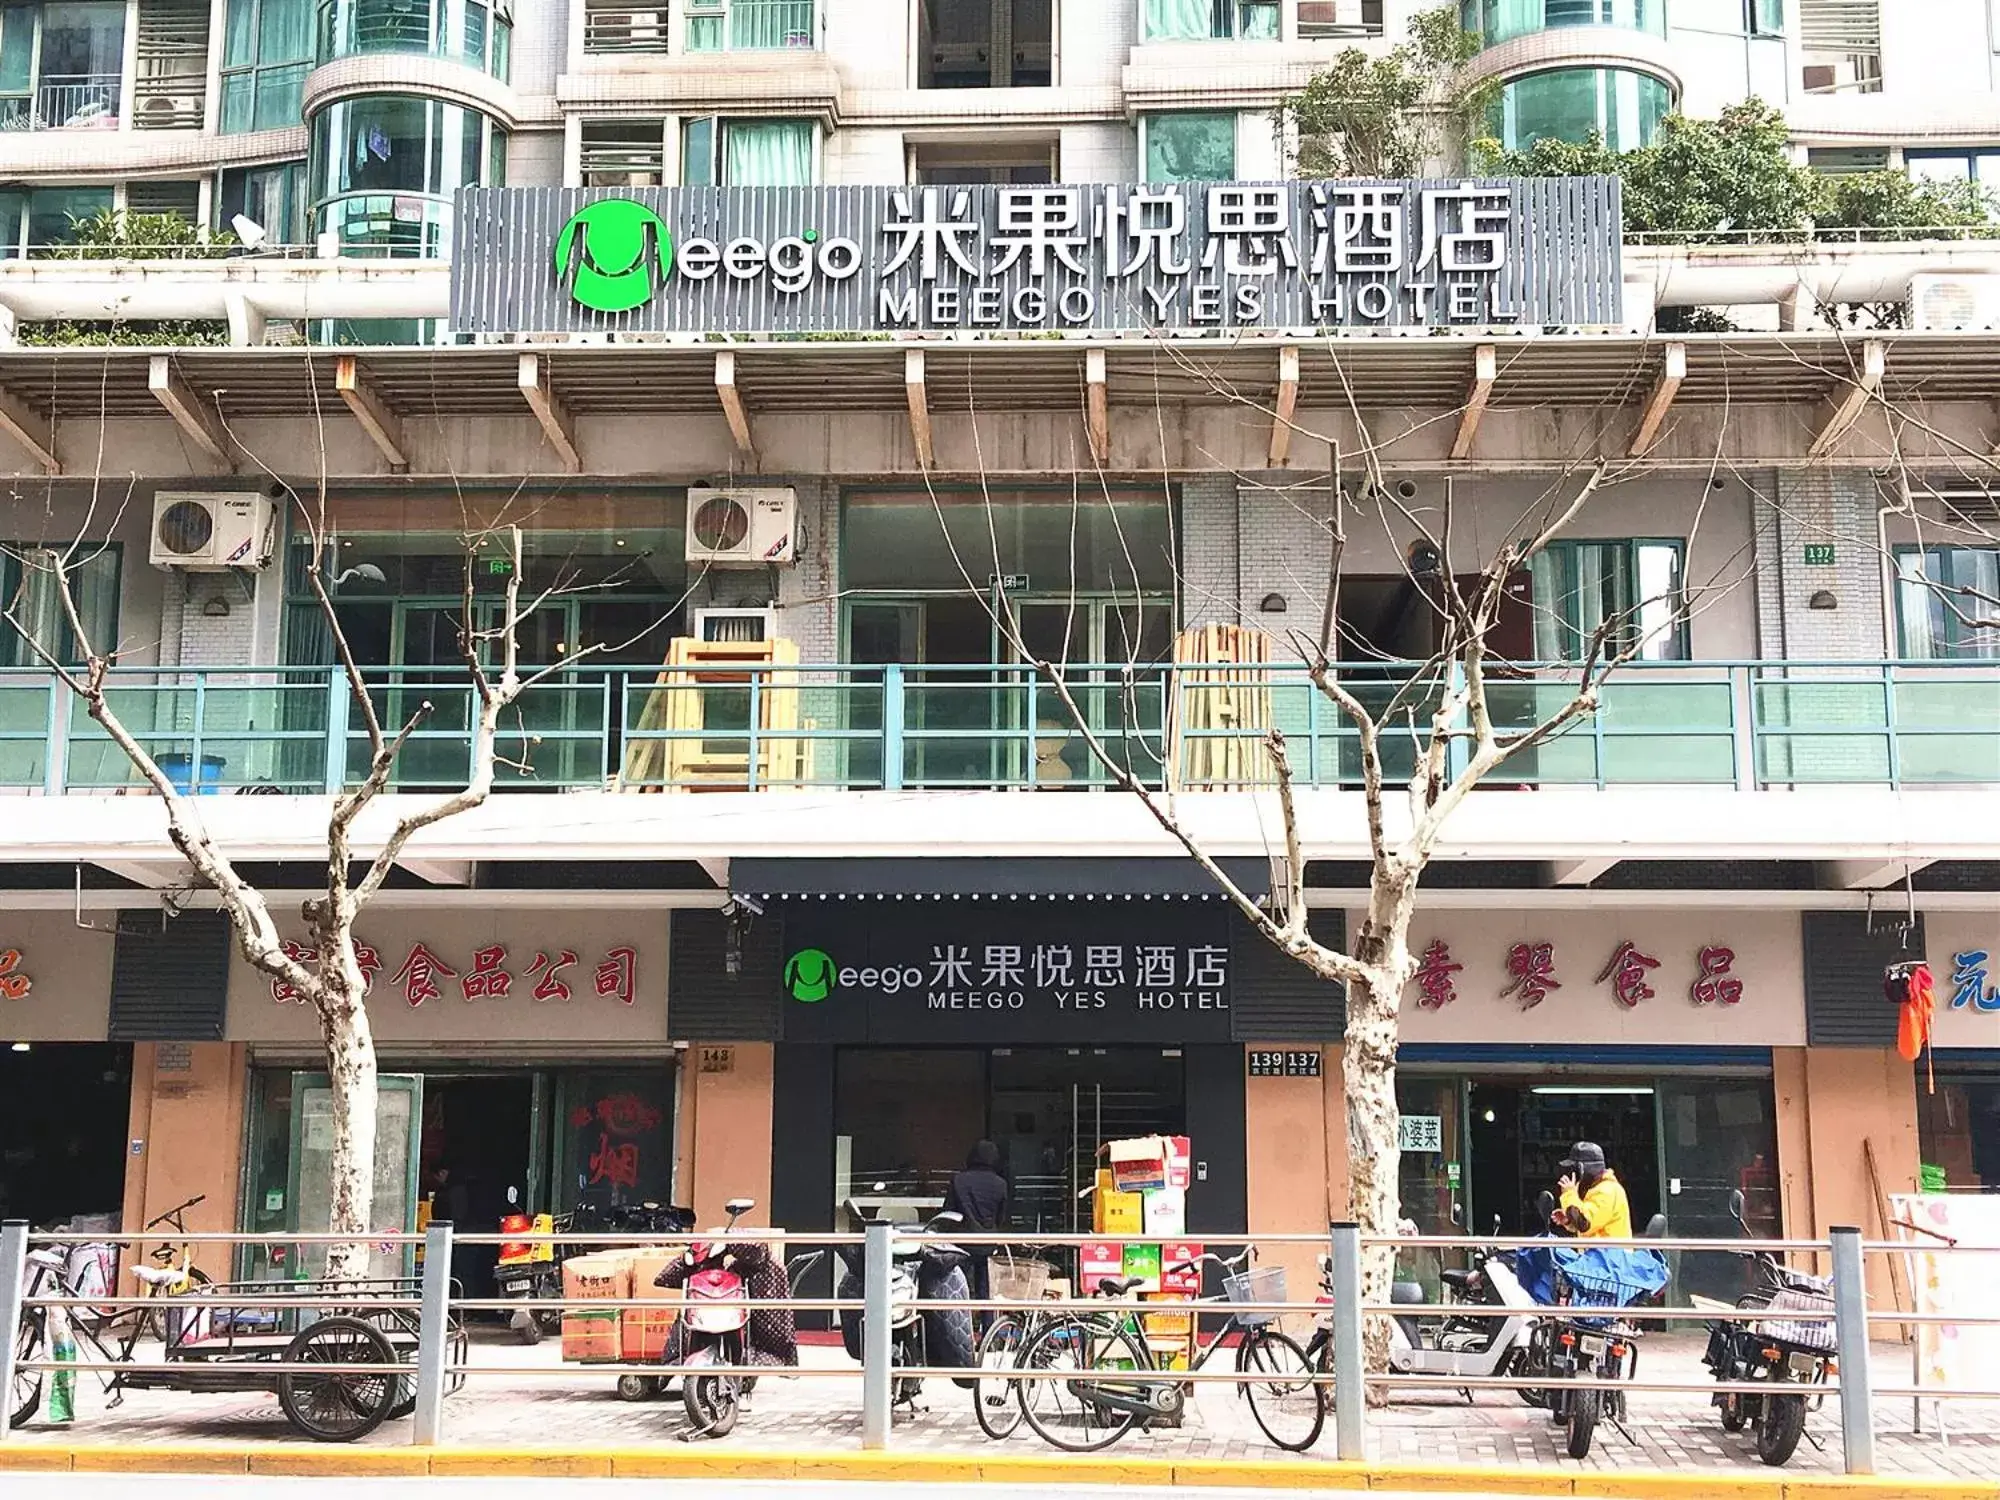 Property Building in Meego Yes Hotel